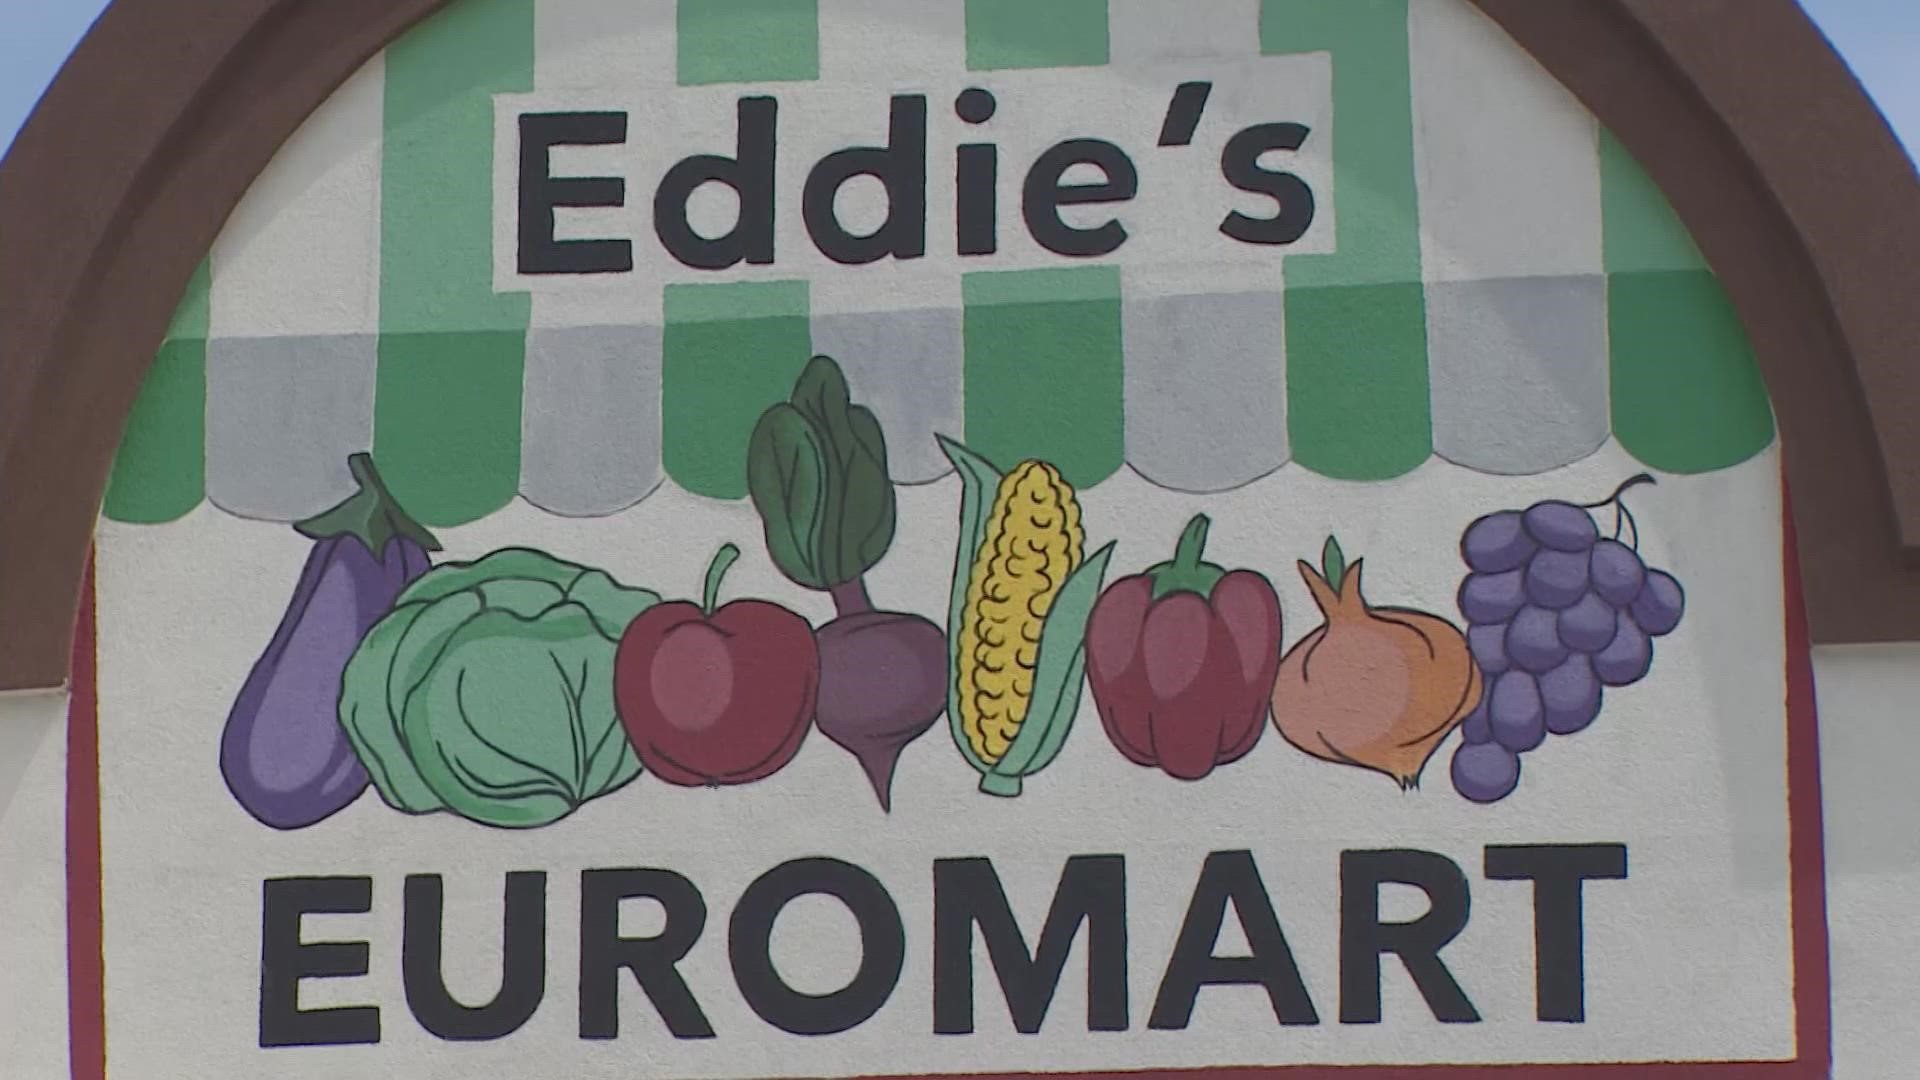 Four years ago, chef Eddie Kola opened Eddie’s EuroMart, a Balkan grocery store and restaurant in Dallas. He's had a couple big visitors since.